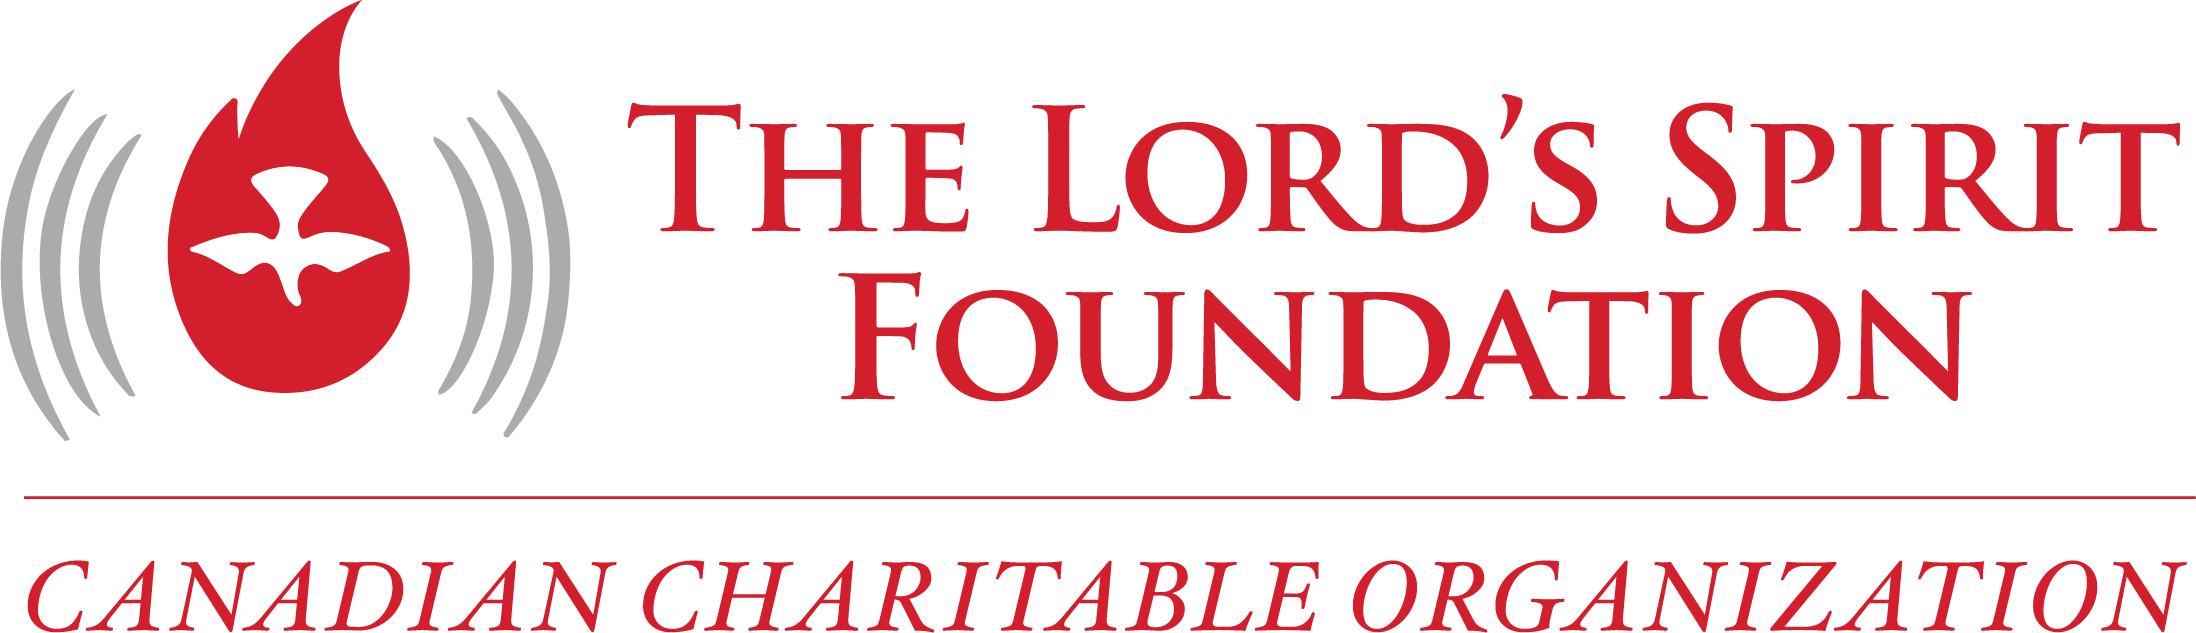 The Lord’s Spirit Foundation